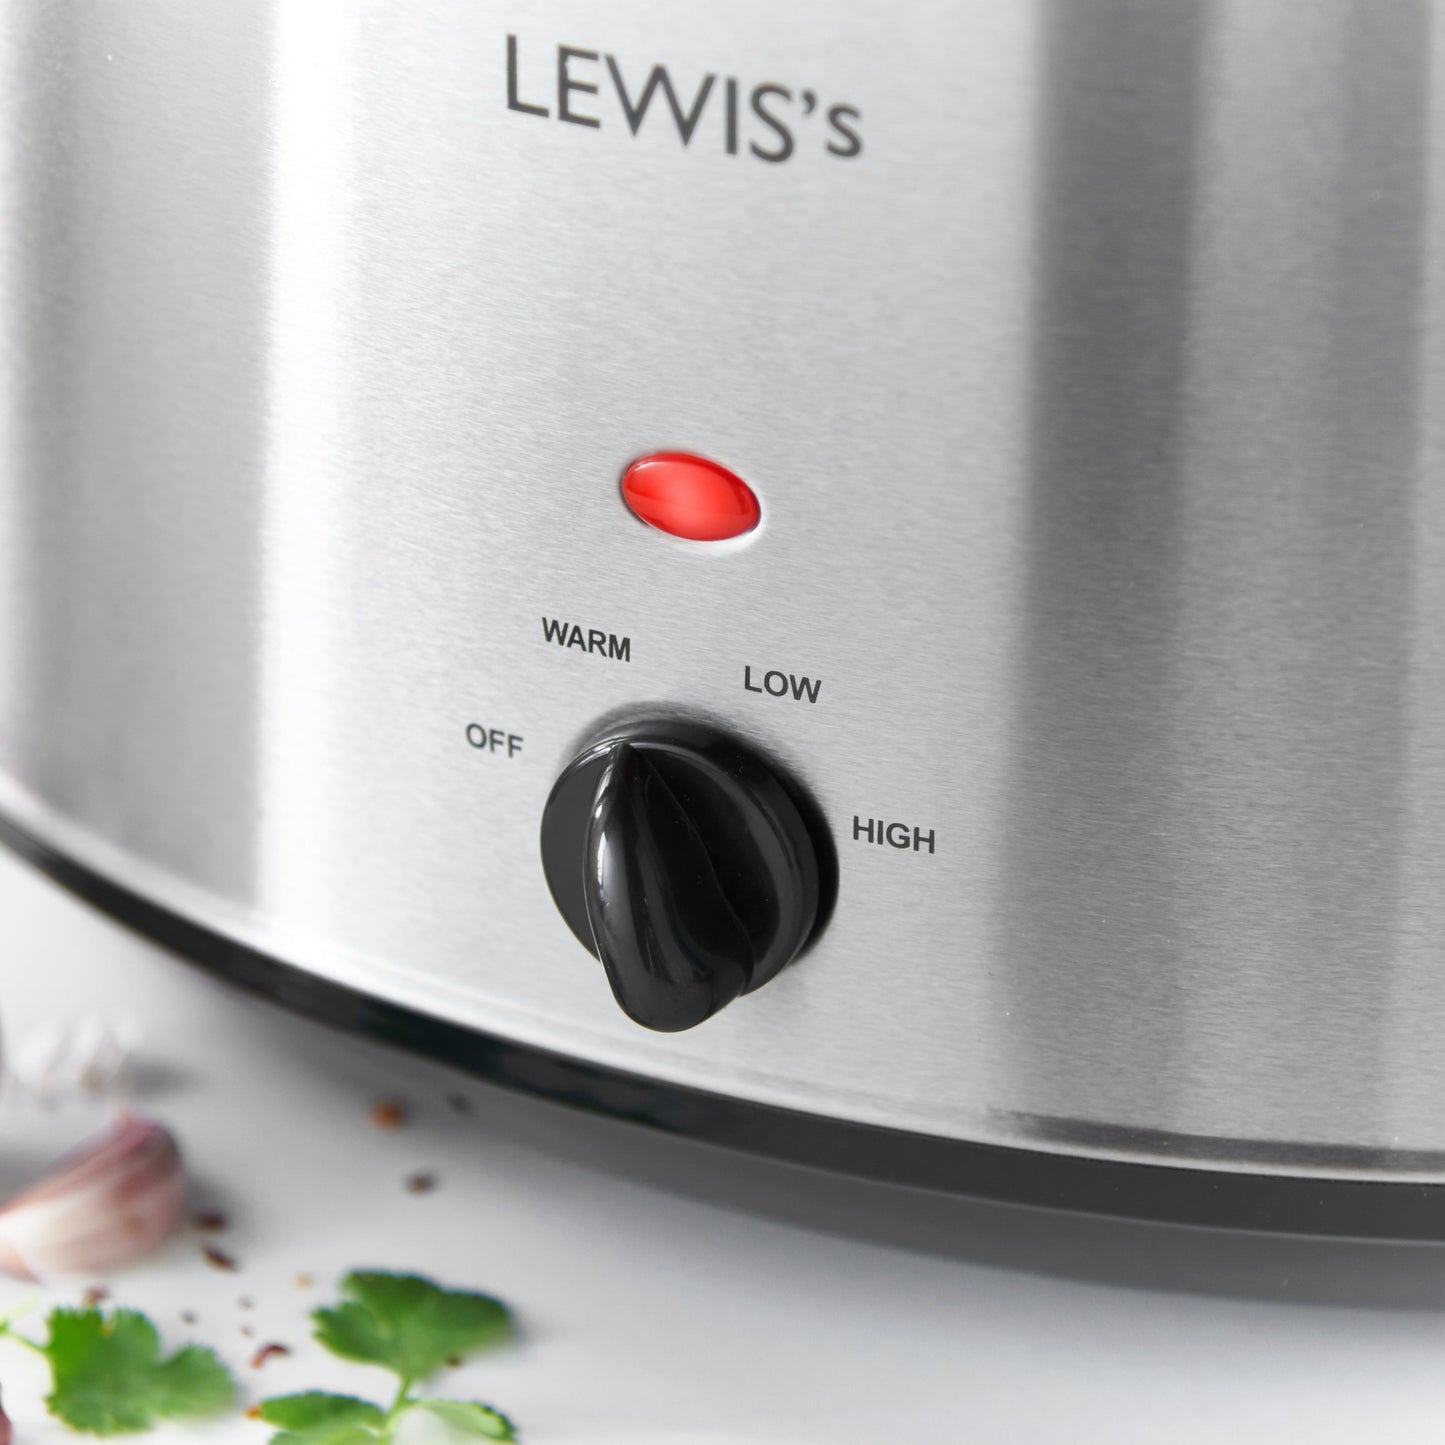 Lewis's 8L Stainless Steel Slow Cooker